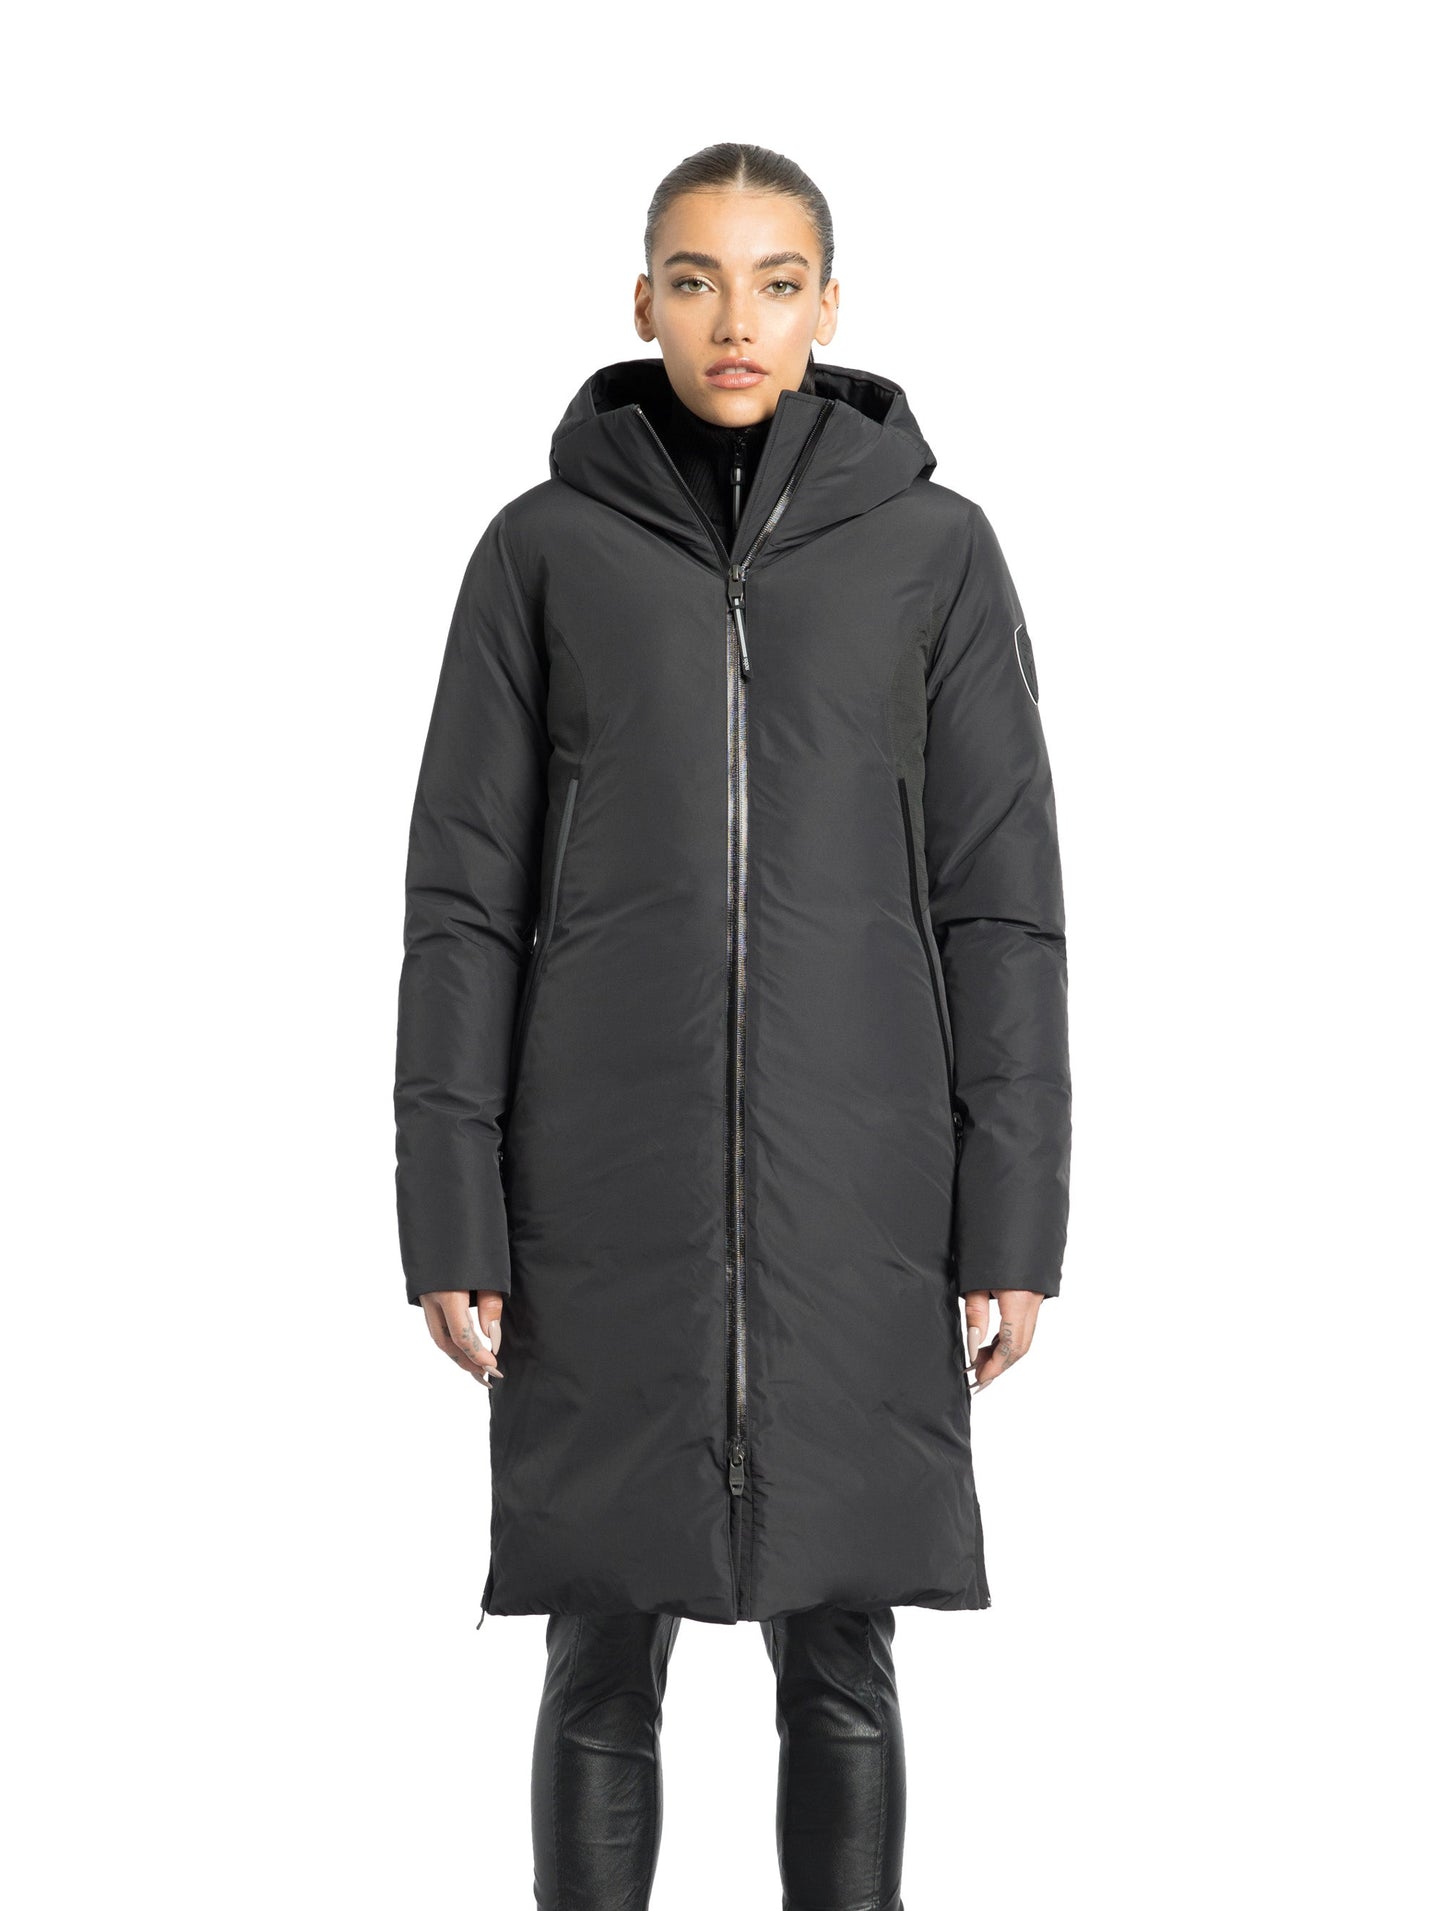 Inara Women's Performance Parka in knee length, premium 3-ply micro denier and stretch ripstop fabrication with DWR coating, Premium Canadian White Duck Down insulation, non-removable down-filled hood, centre front two-way zipper, large vertical zipper pockets along waist, zipper vents along bottom side hem, in Black